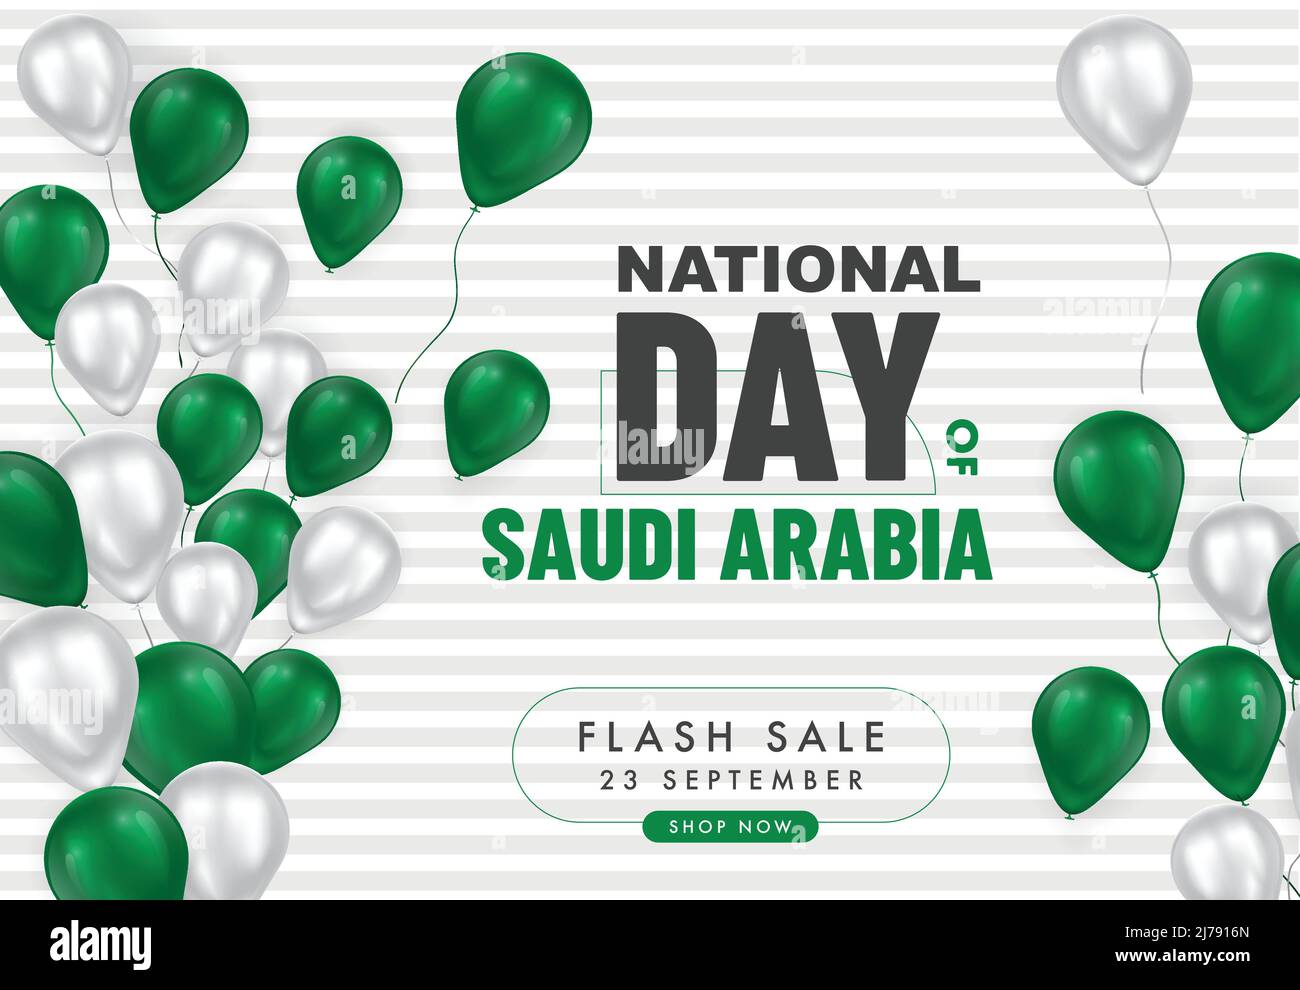 National Day of Saudi Arabia sale banner. 3d green and White realistic glossy balloons with text in the frame. Grey pattern background. Vector illustr Stock Vector